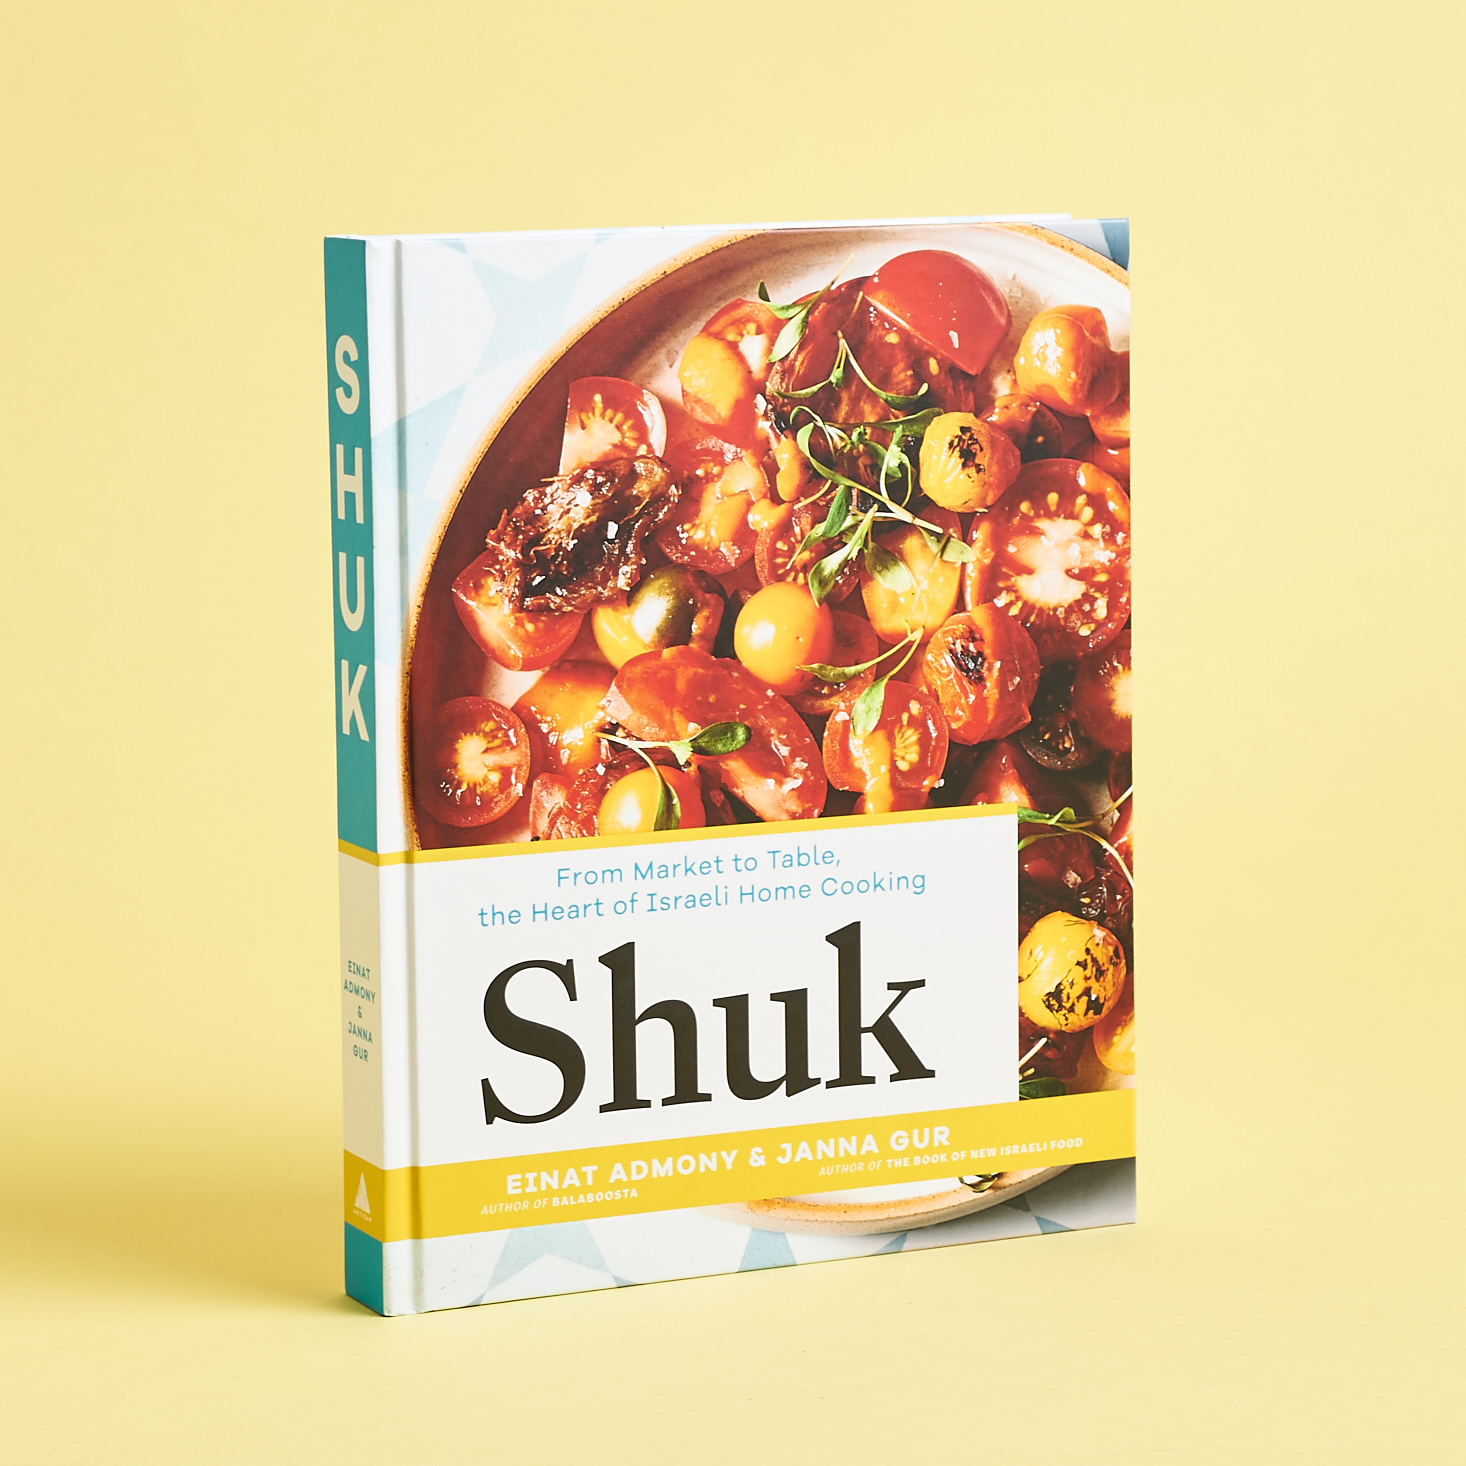 Photo of the cover of Shuk cookbook by Einat Admony.